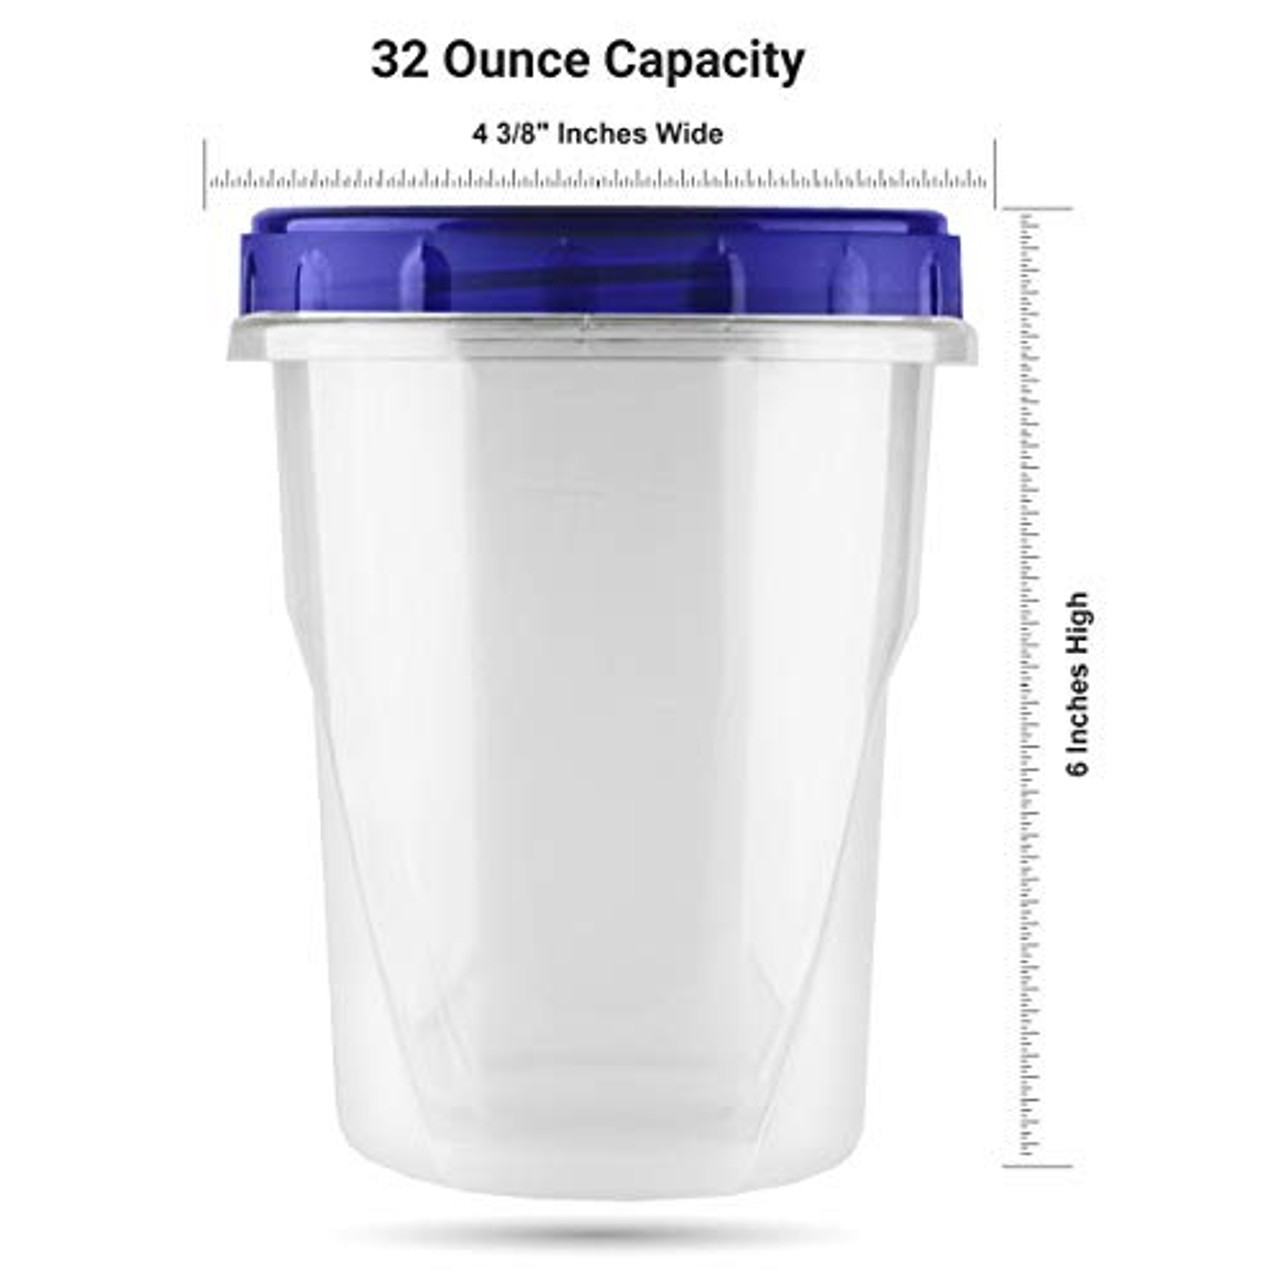 HomeyGear 12 Pack Small Twist Top Food Storage Containers Leak-Proof,  Airtight Storage Canisters with Screw